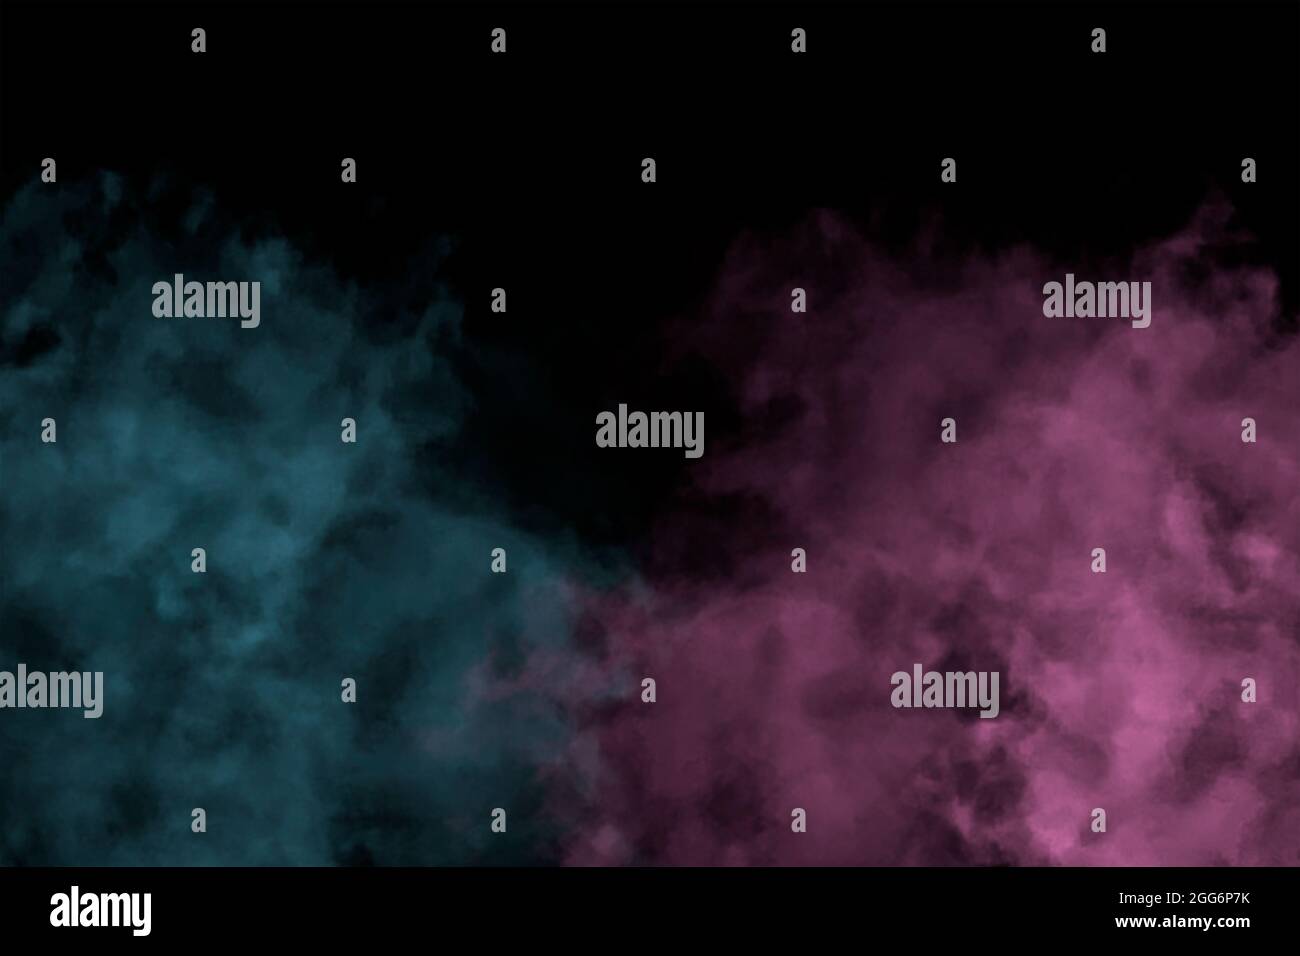 This is a blue and pink smoke or fog overlay to create a special effect on photos and designs Stock Photo